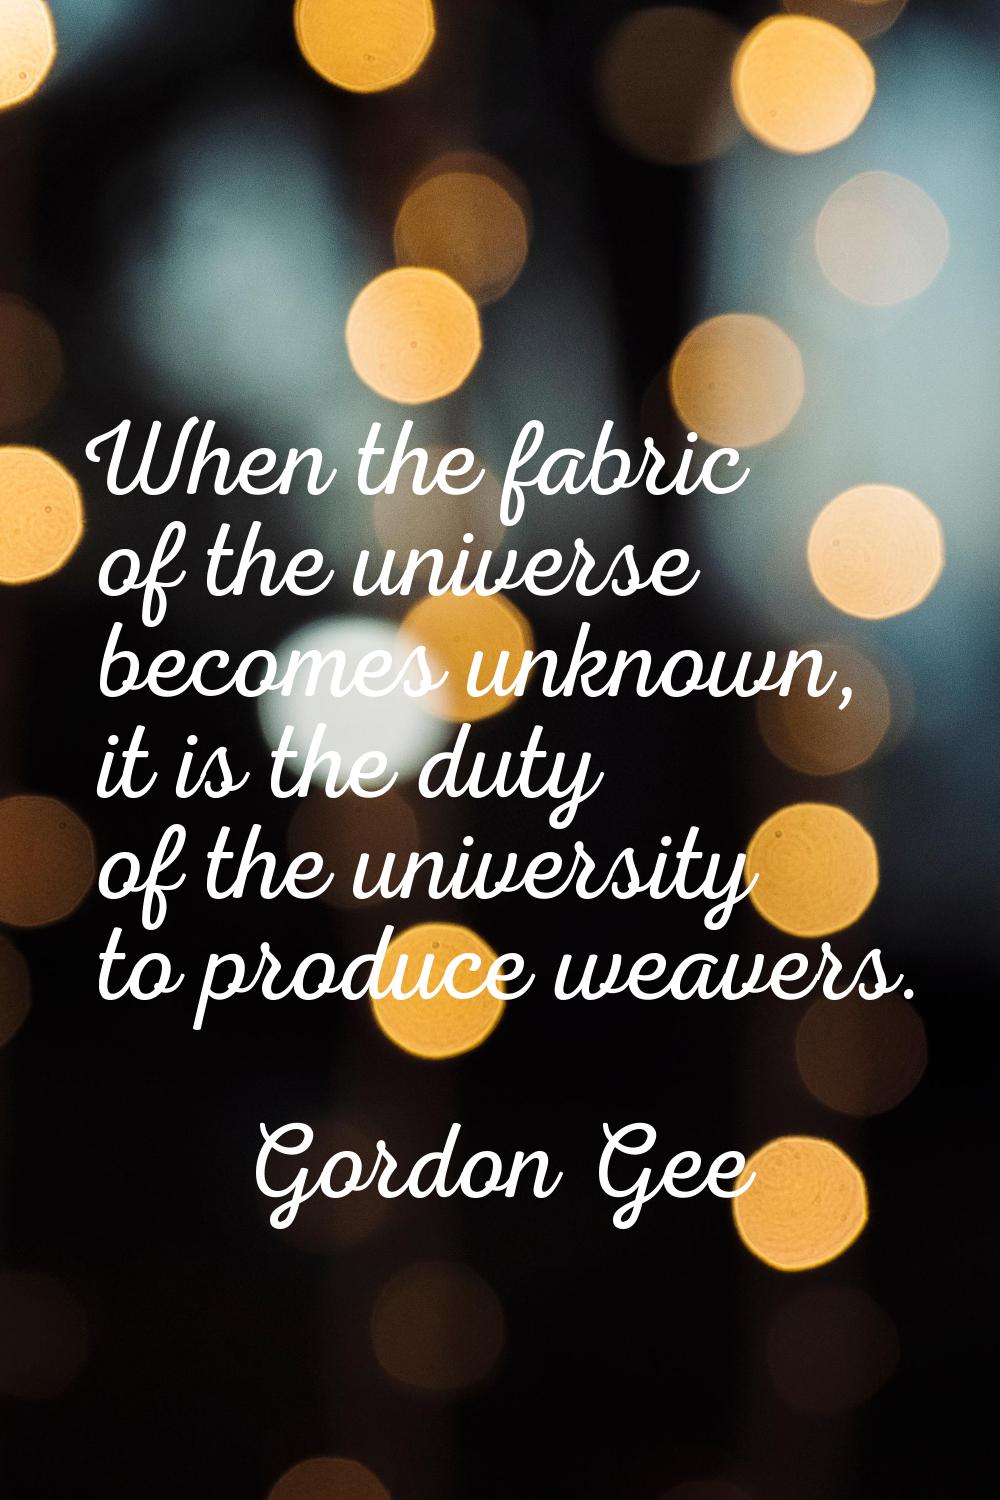 When the fabric of the universe becomes unknown, it is the duty of the university to produce weaver